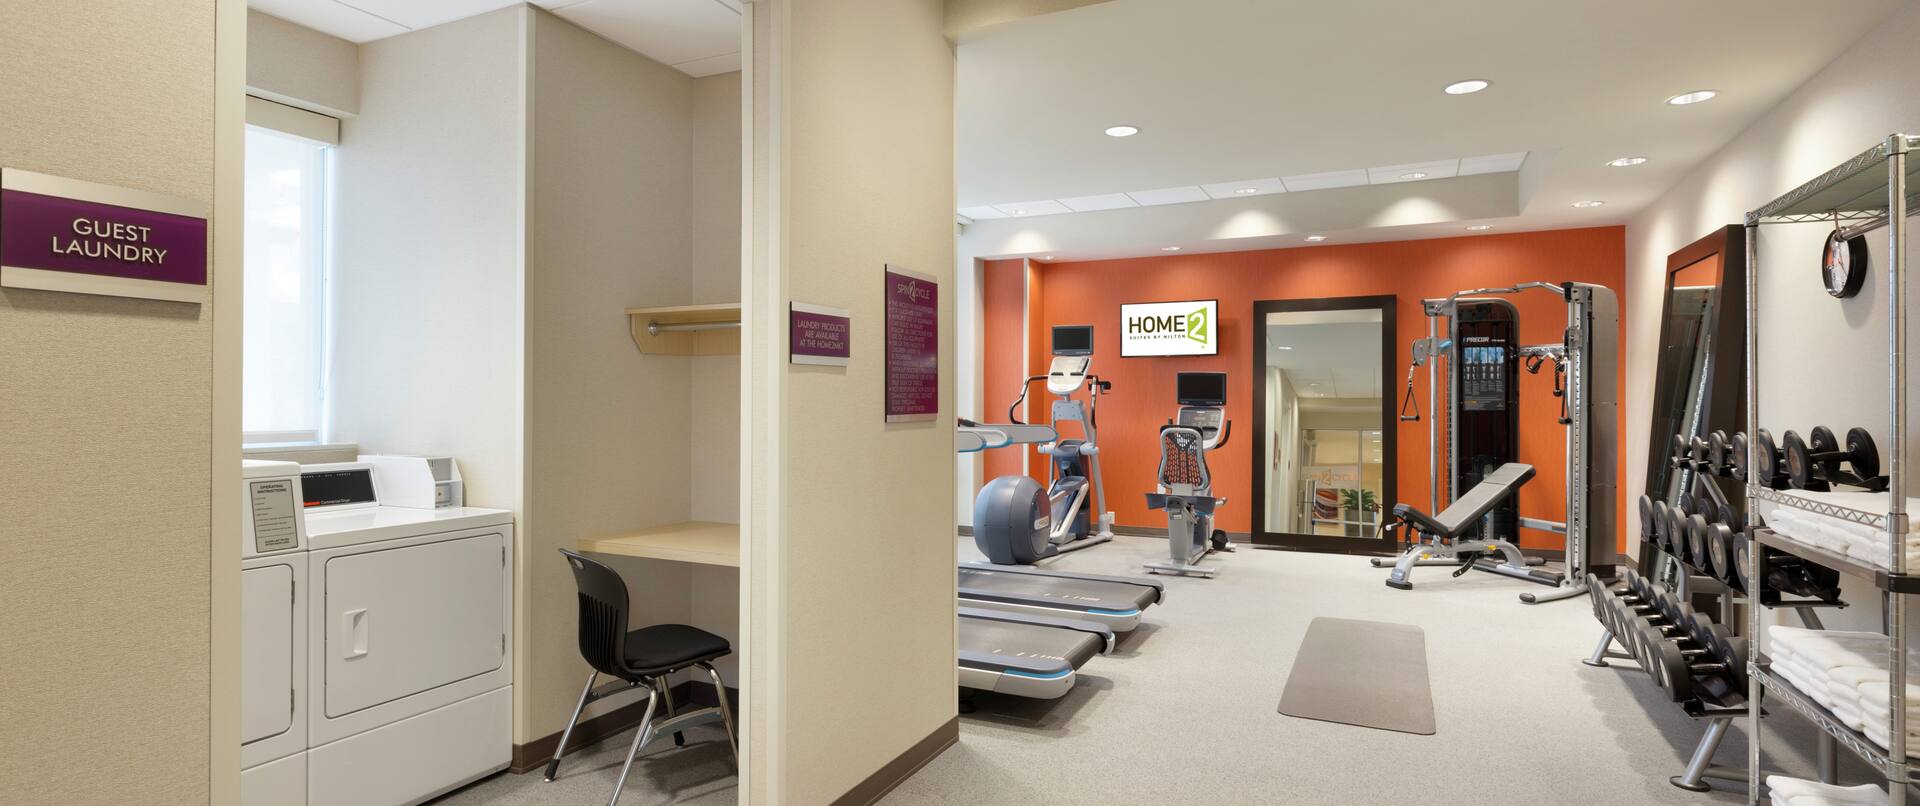 Spin2 Cycle Laundry Facilities and Fitness Center